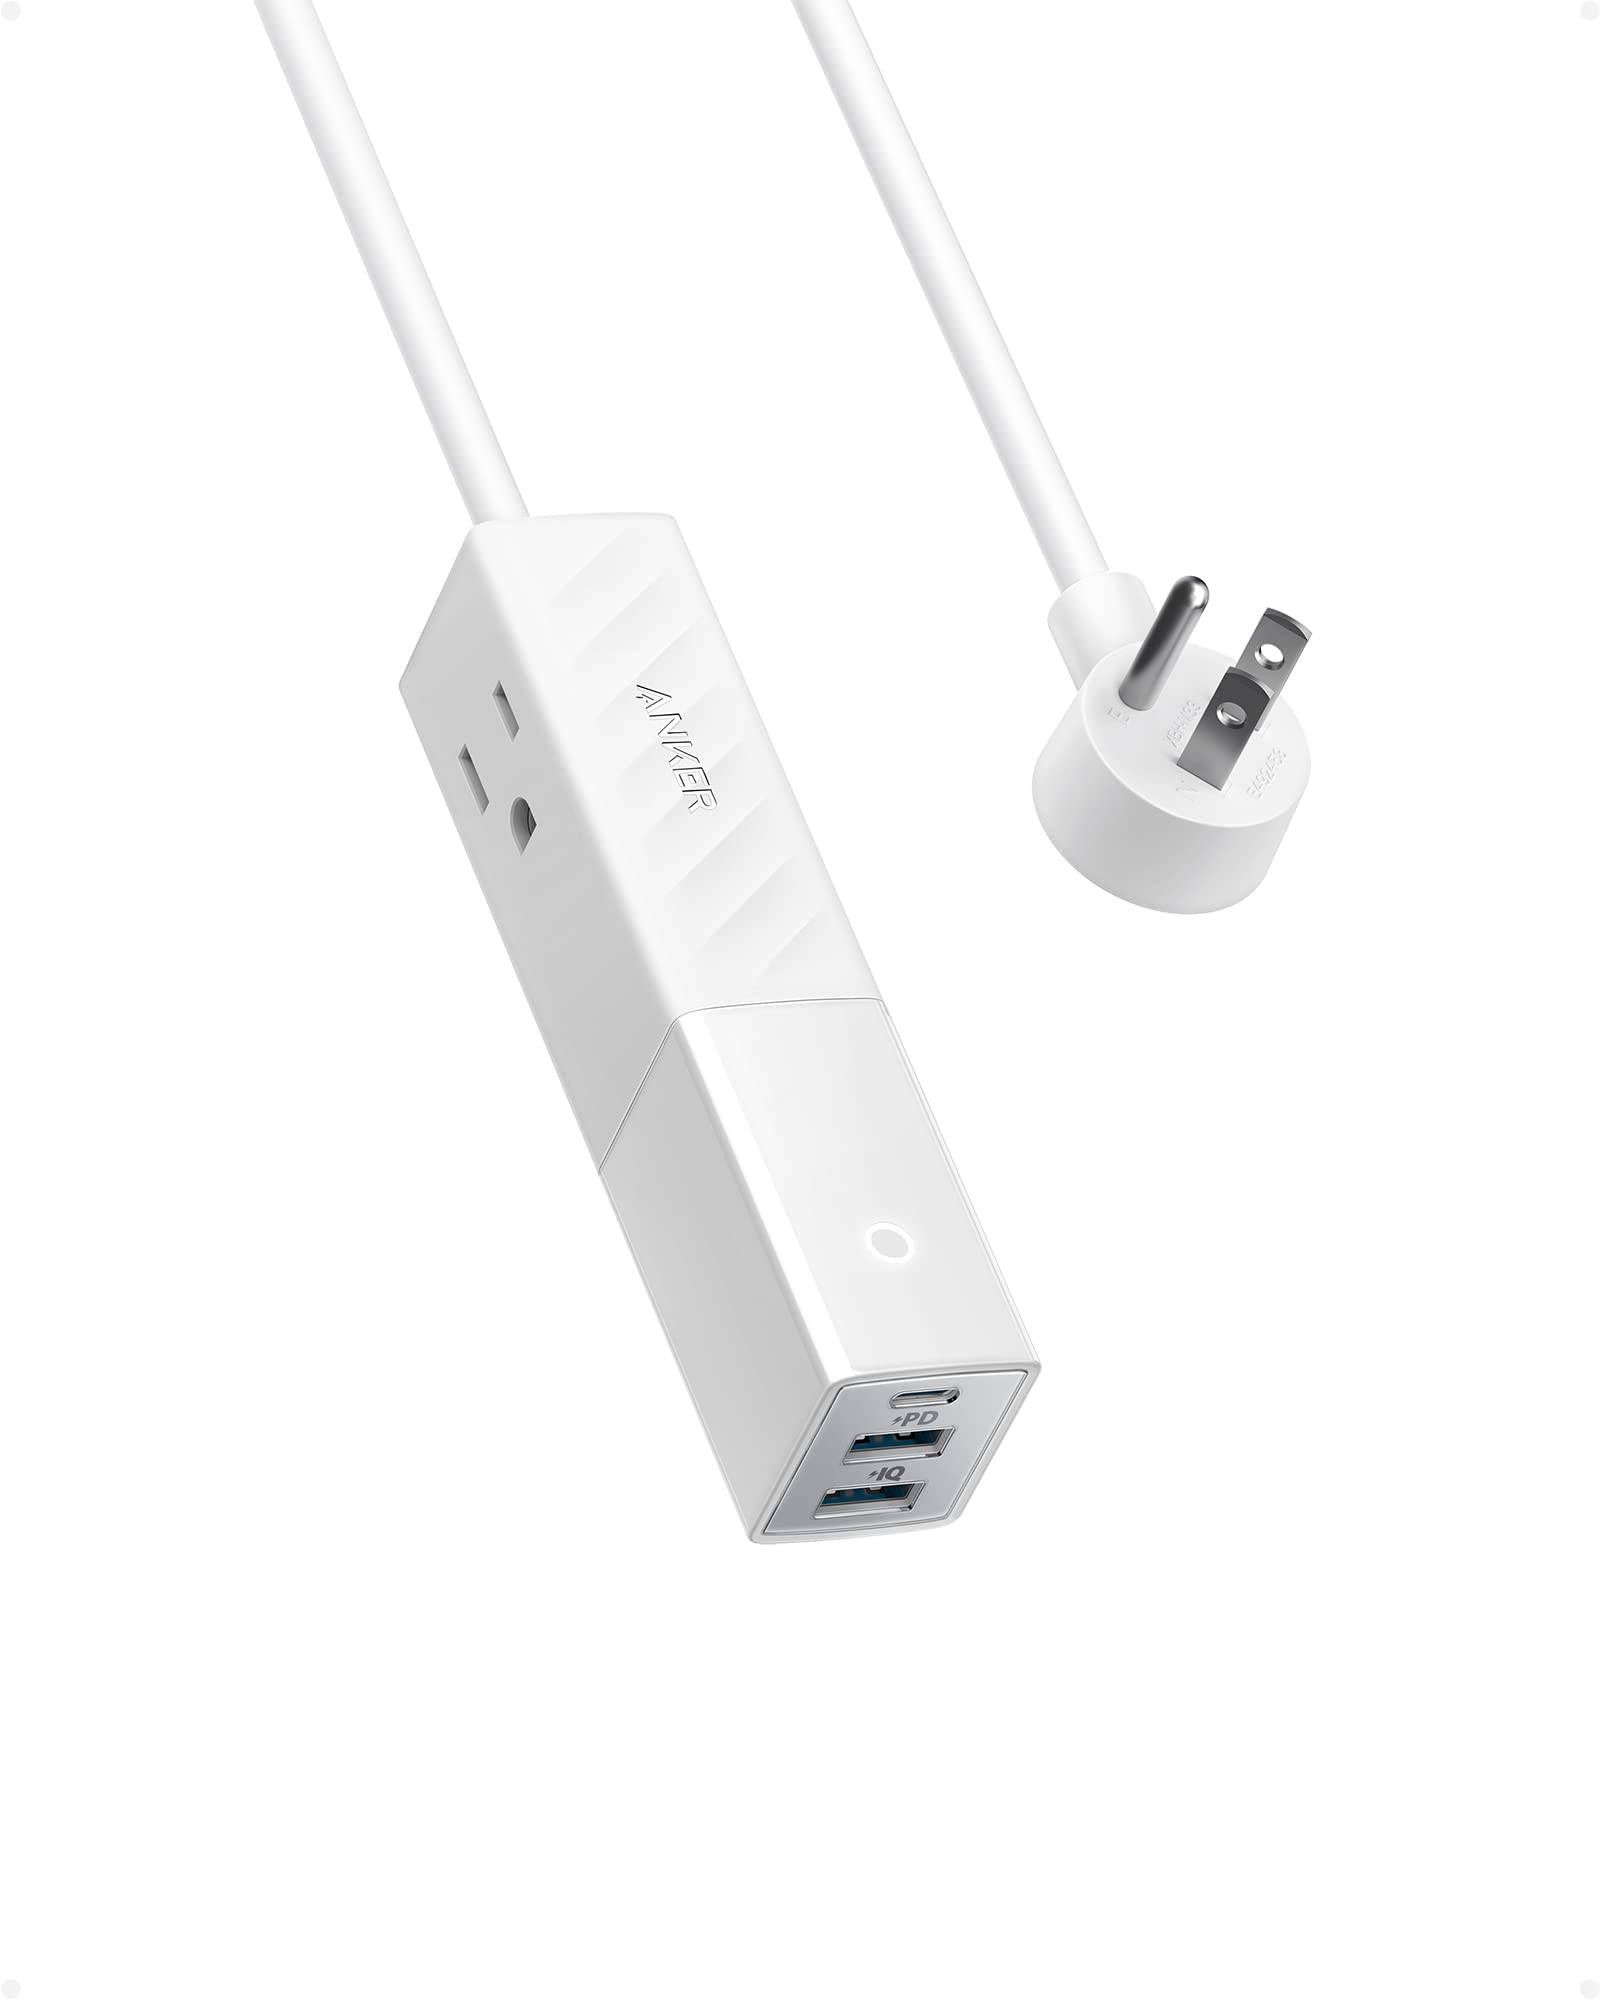 Anker 511 30W 5-In-1 USB Portable Power Strip w/ 5' Extension Cord (White) $14.25 + Free Shipping w/ Prime or on $35+